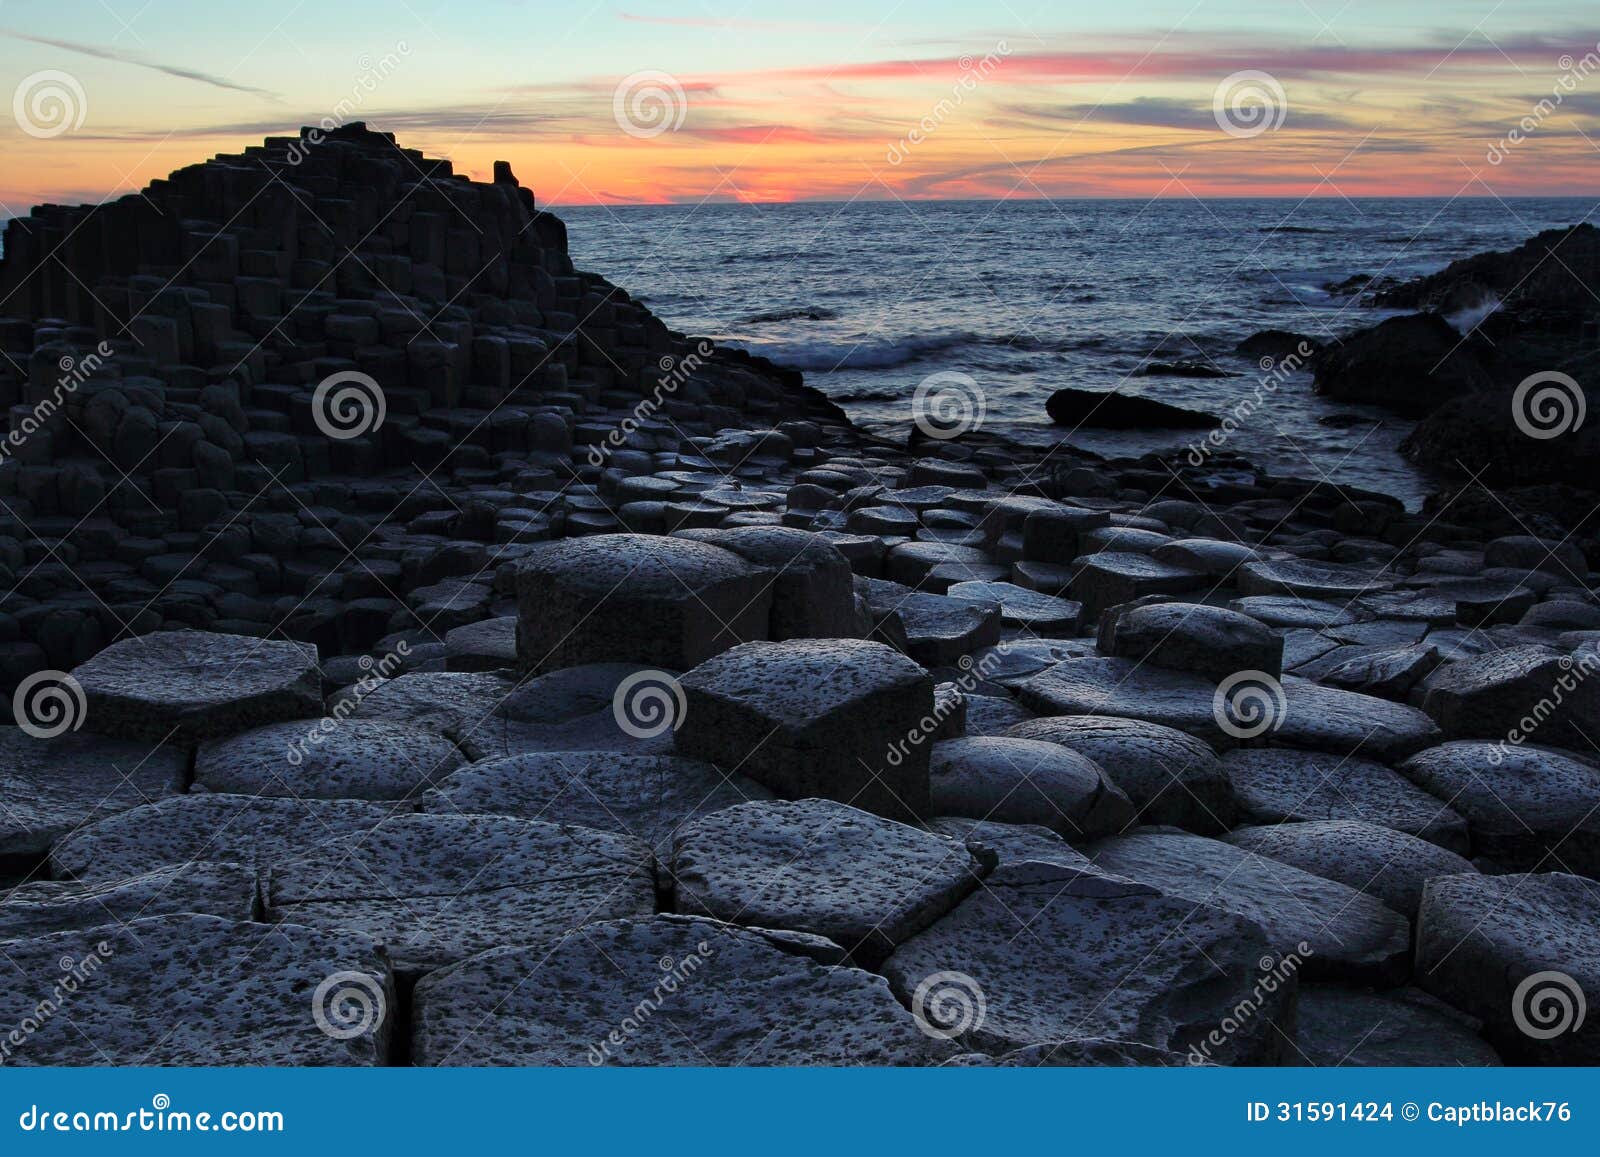 giant causeway in antrim county at sunset